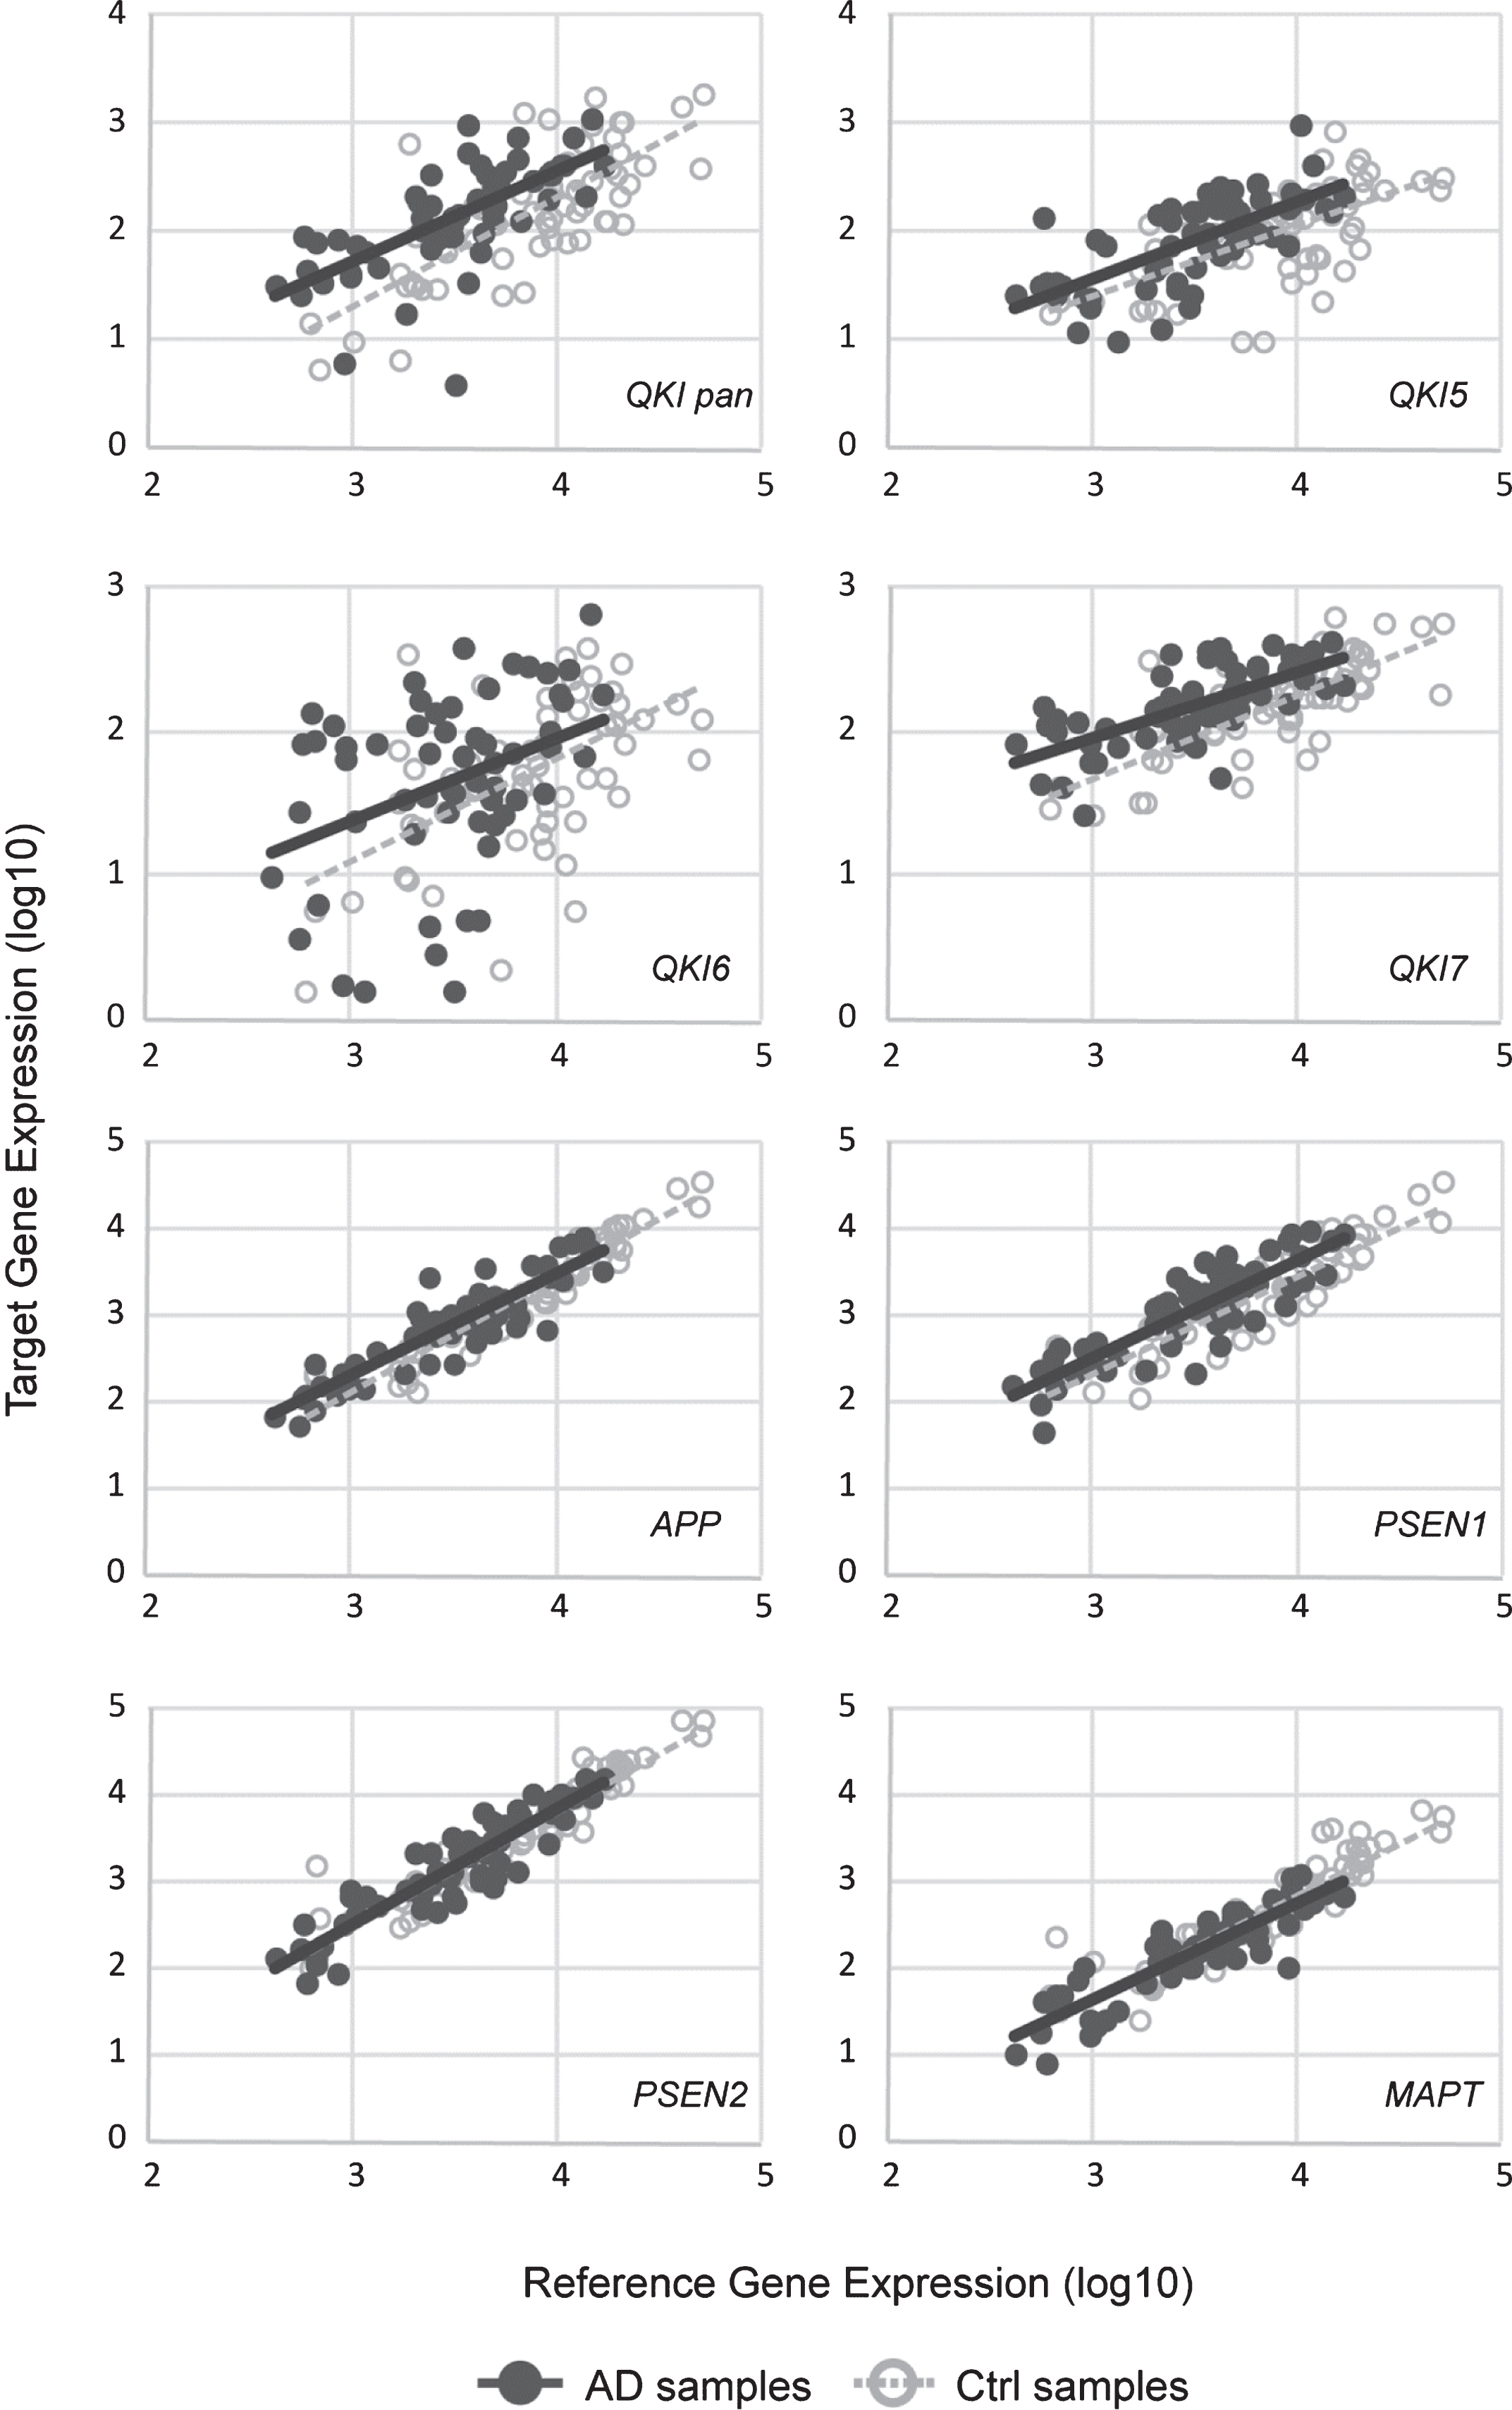 Scatterplots of gene expression values. sAD samples are shown in filled circles with solid line of best fit. Control samples are shown in open circles, with dashed line of best fit. Y-axis shows the target gene expression value. X-axis shows the geometric means of the reference genes (ACTB and GAPDH). All values are log10.